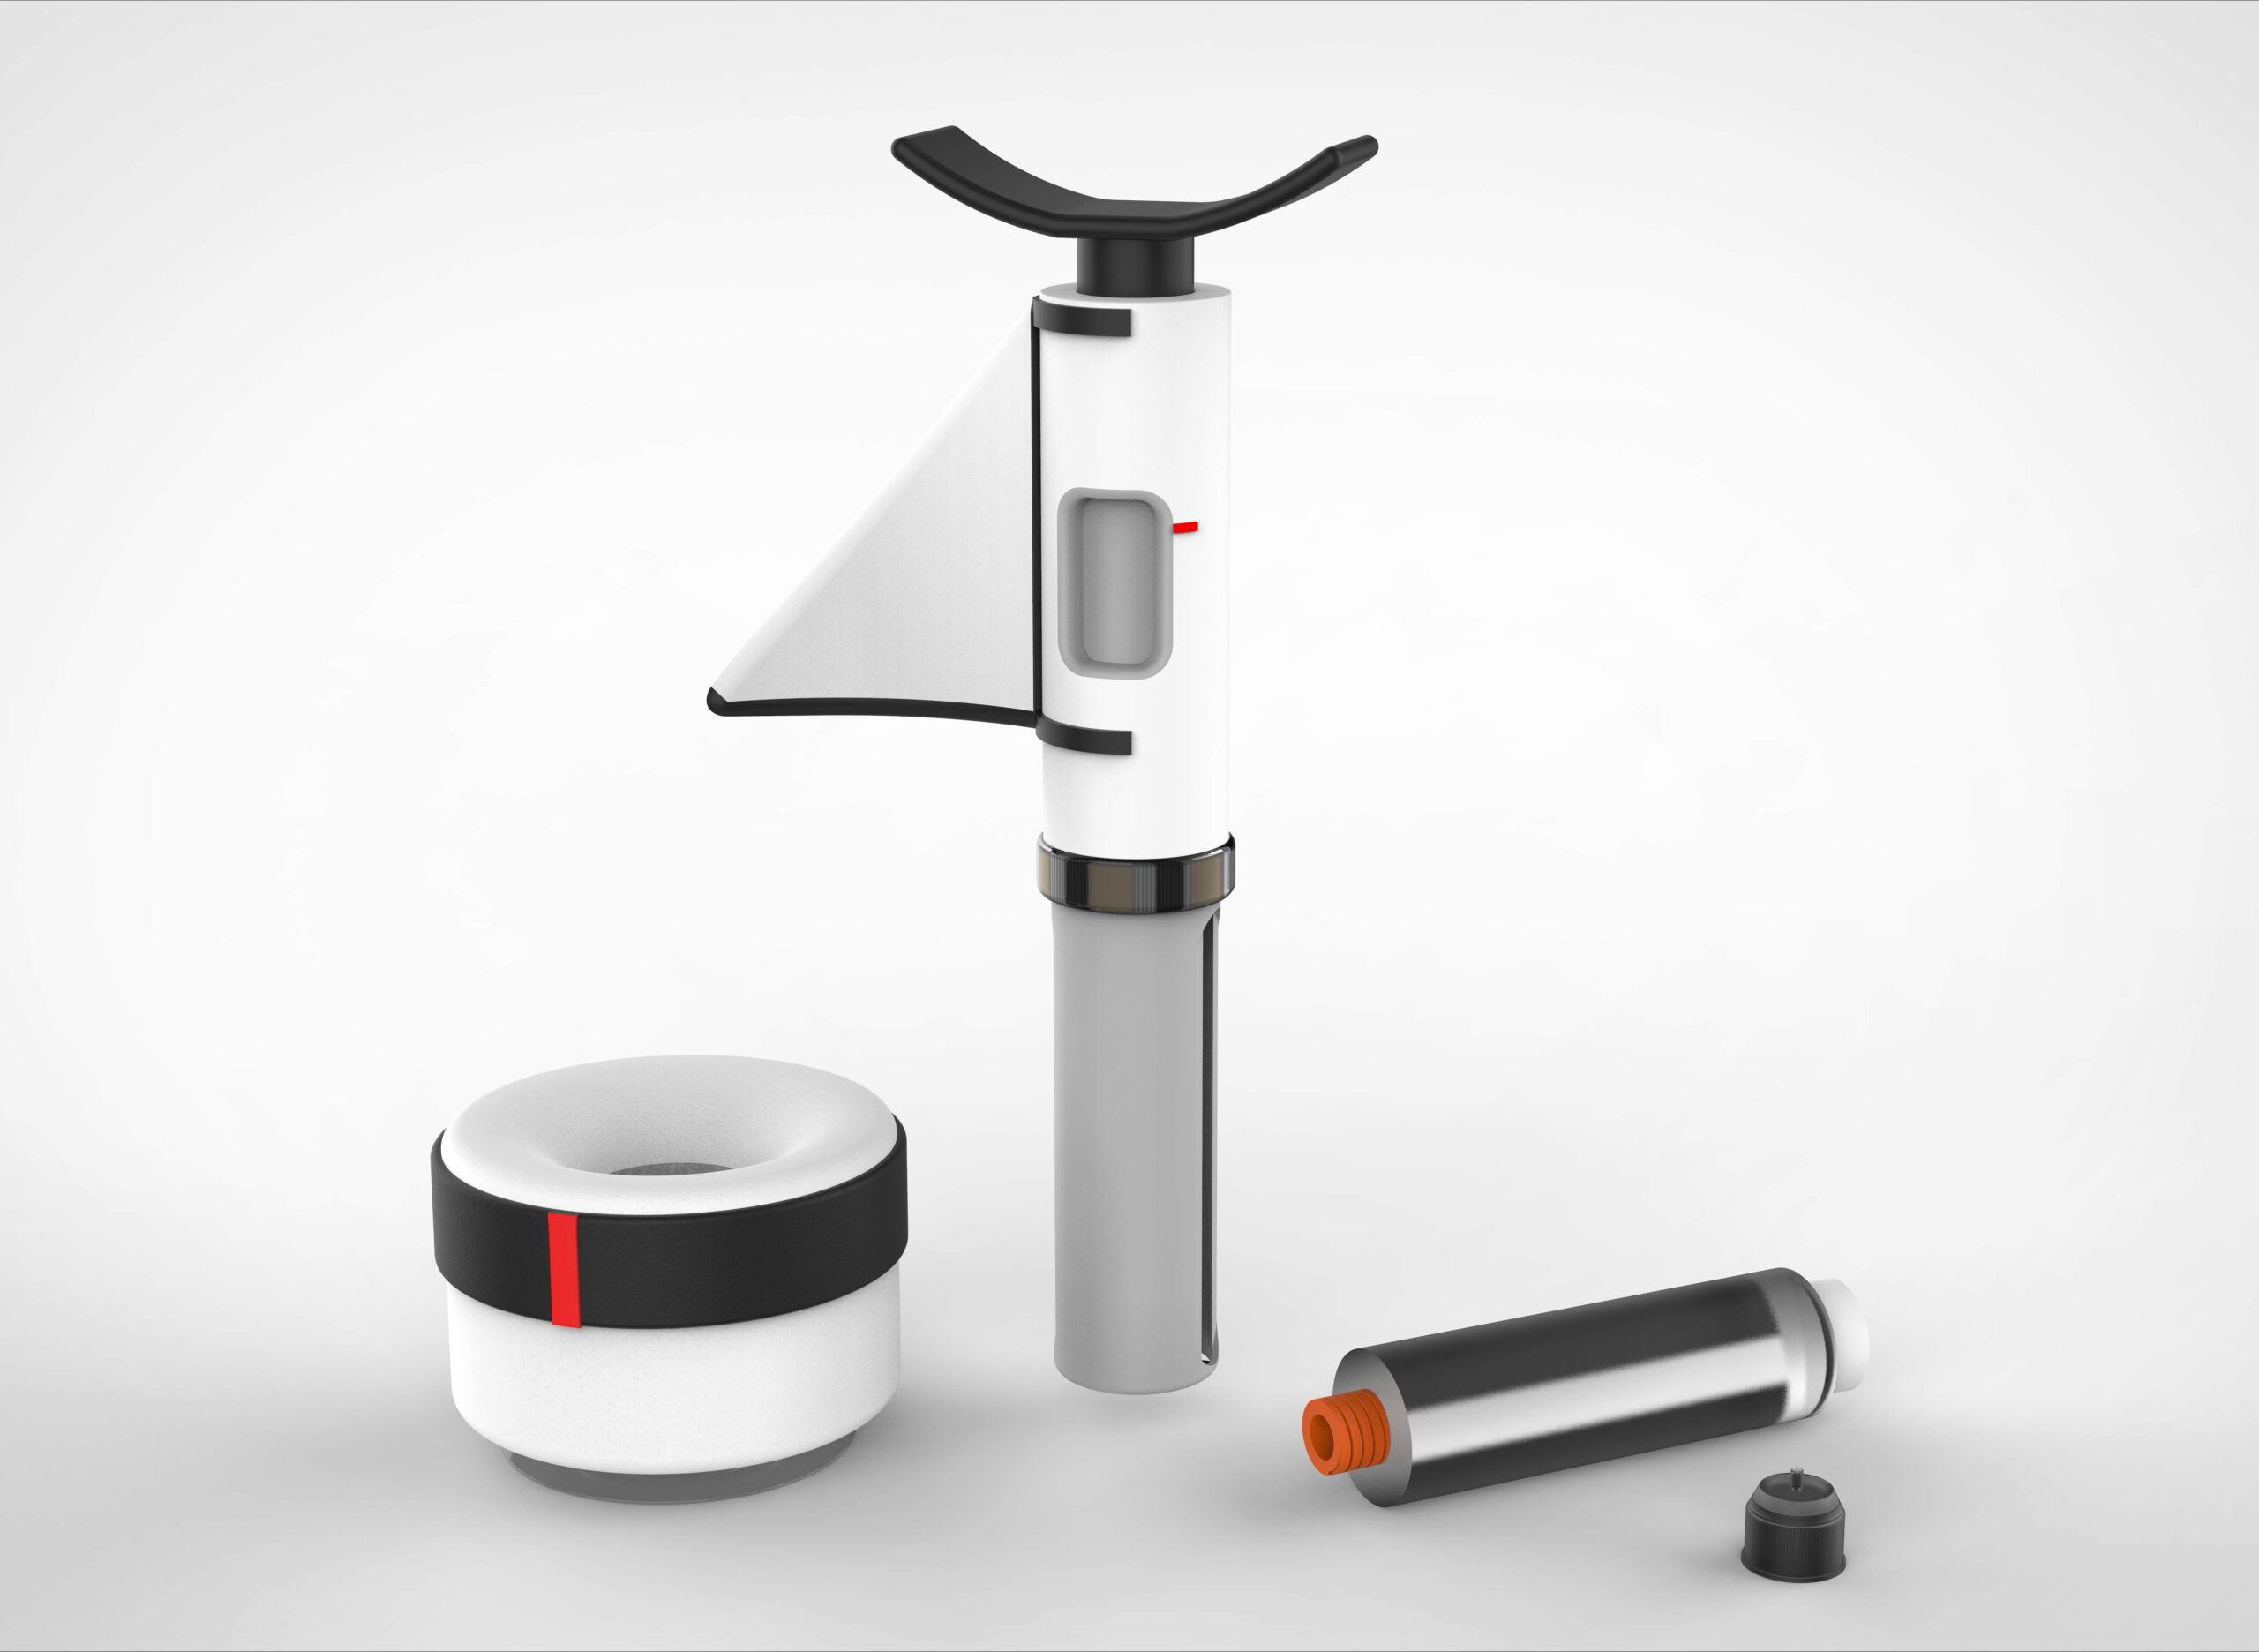 A design concept for an insulin injection device. It is made of white and black plastic with red accents. There are several pieces corresponding to a holder, canister and vacuum chamber. There are ergonomic features to facilitate handling.